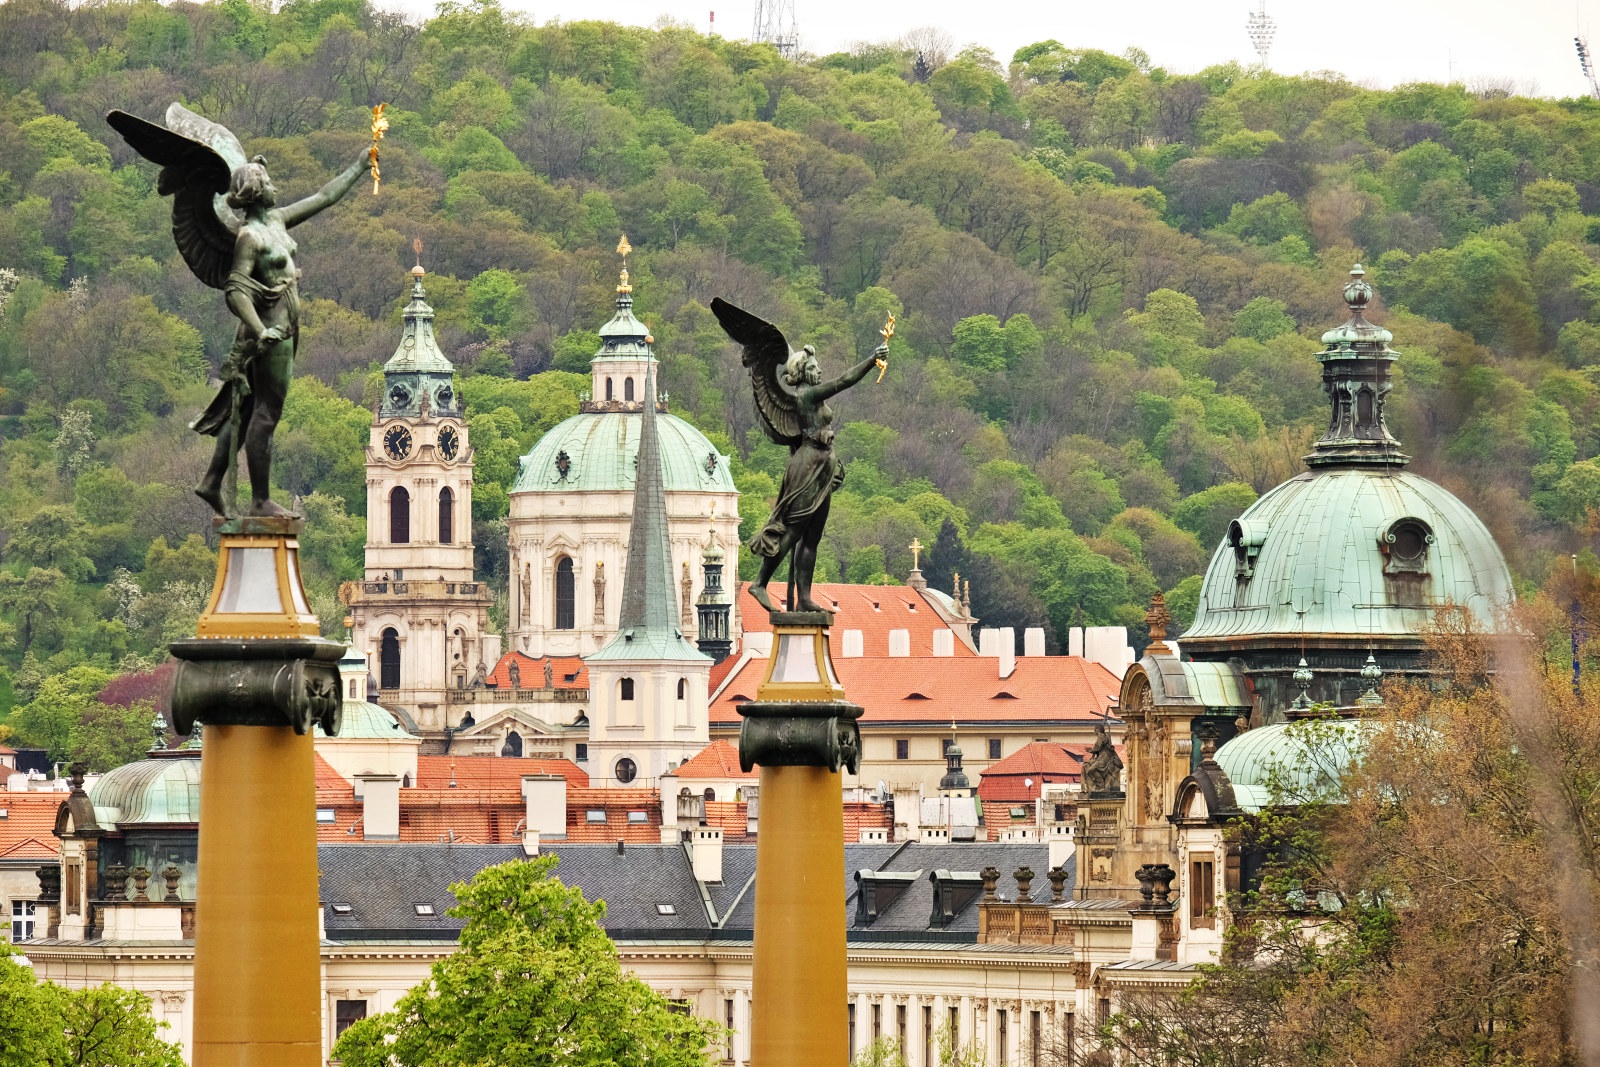 Winged victory statues dominate the view across historic Malá Strana and St. Nicholas Church to Petřín Gardens and the Petřín park